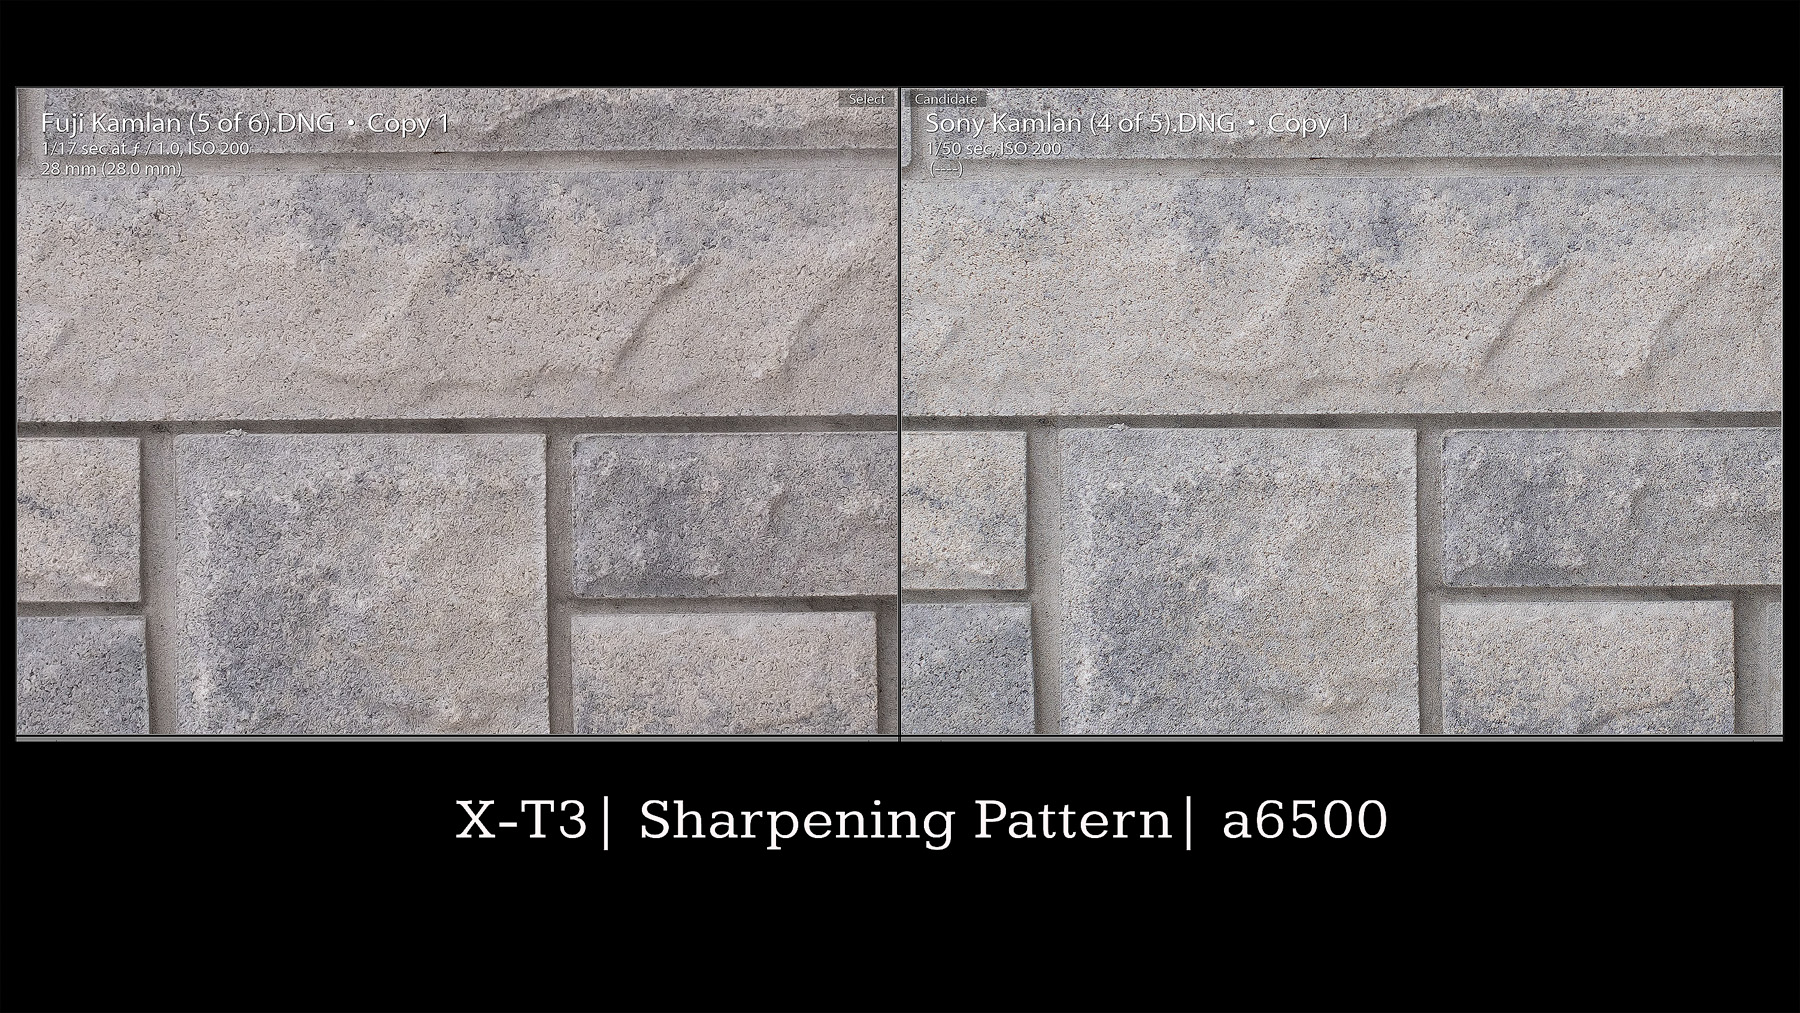 44 Sharpening Differences